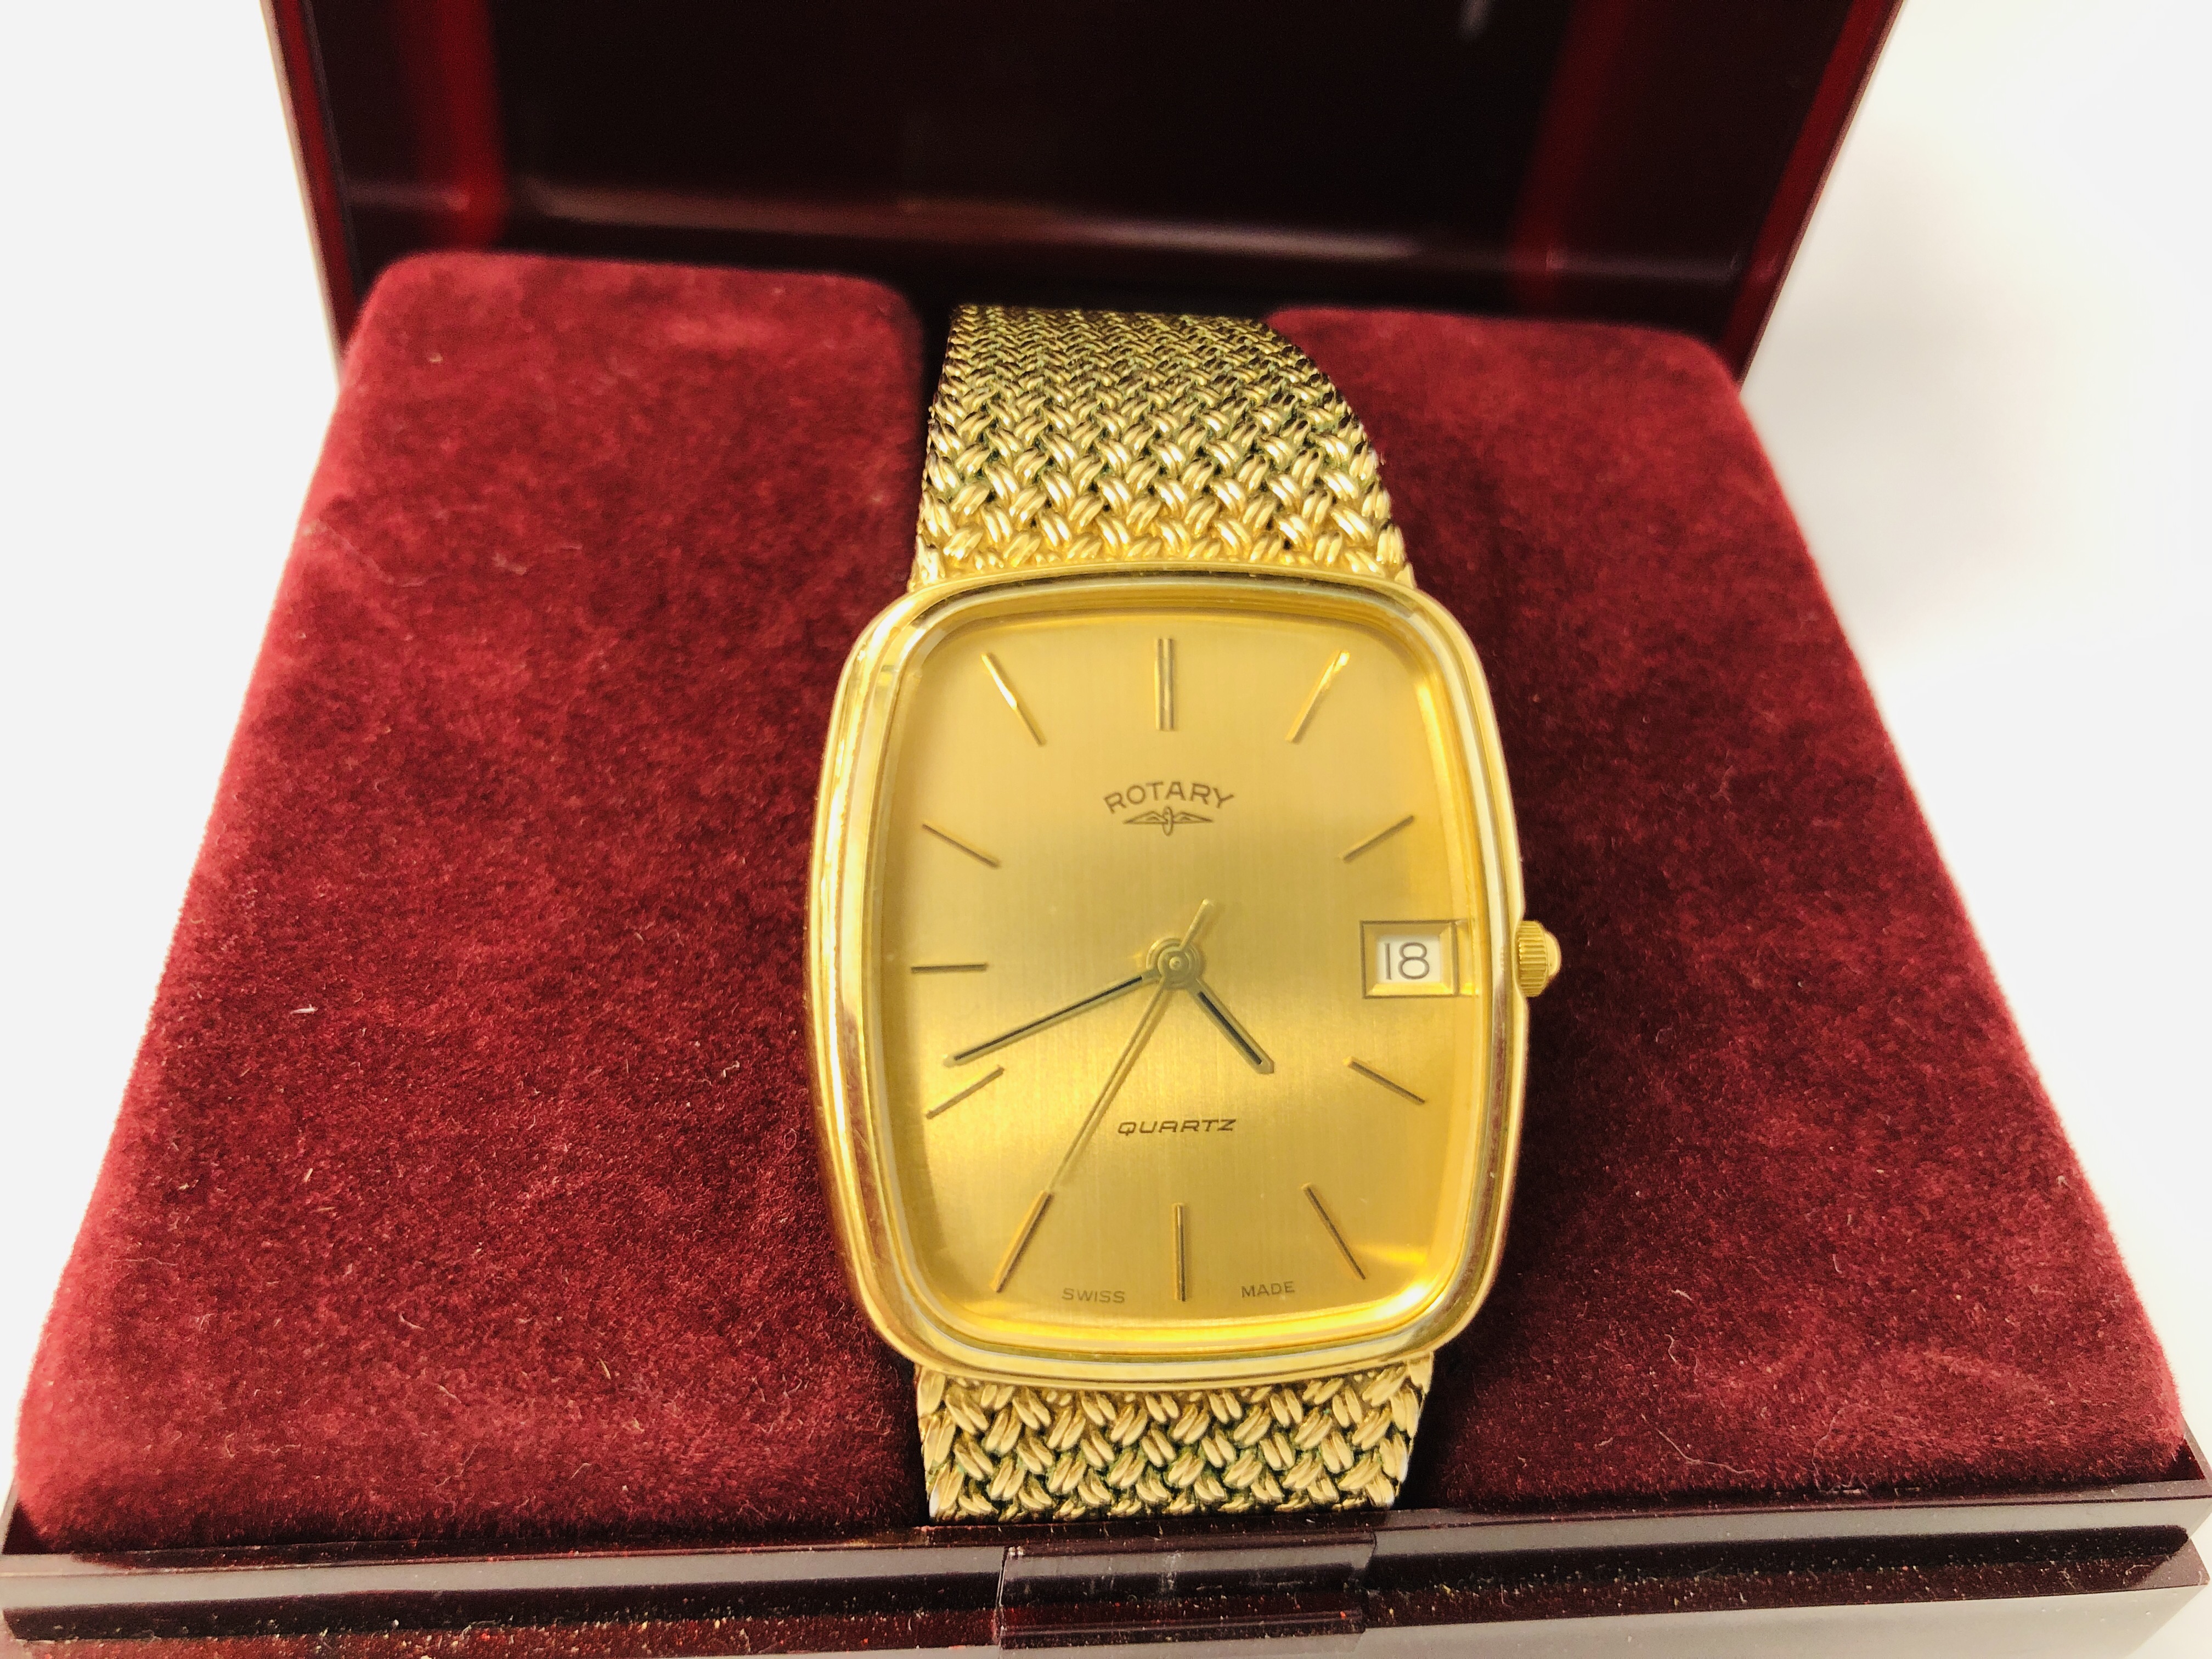 A GENTLEMAN'S ROTARY WRIST WATCH ON GOLD PLATED BRAIDED BRACELET, QUARTZ MOVEMENT. - Image 2 of 7